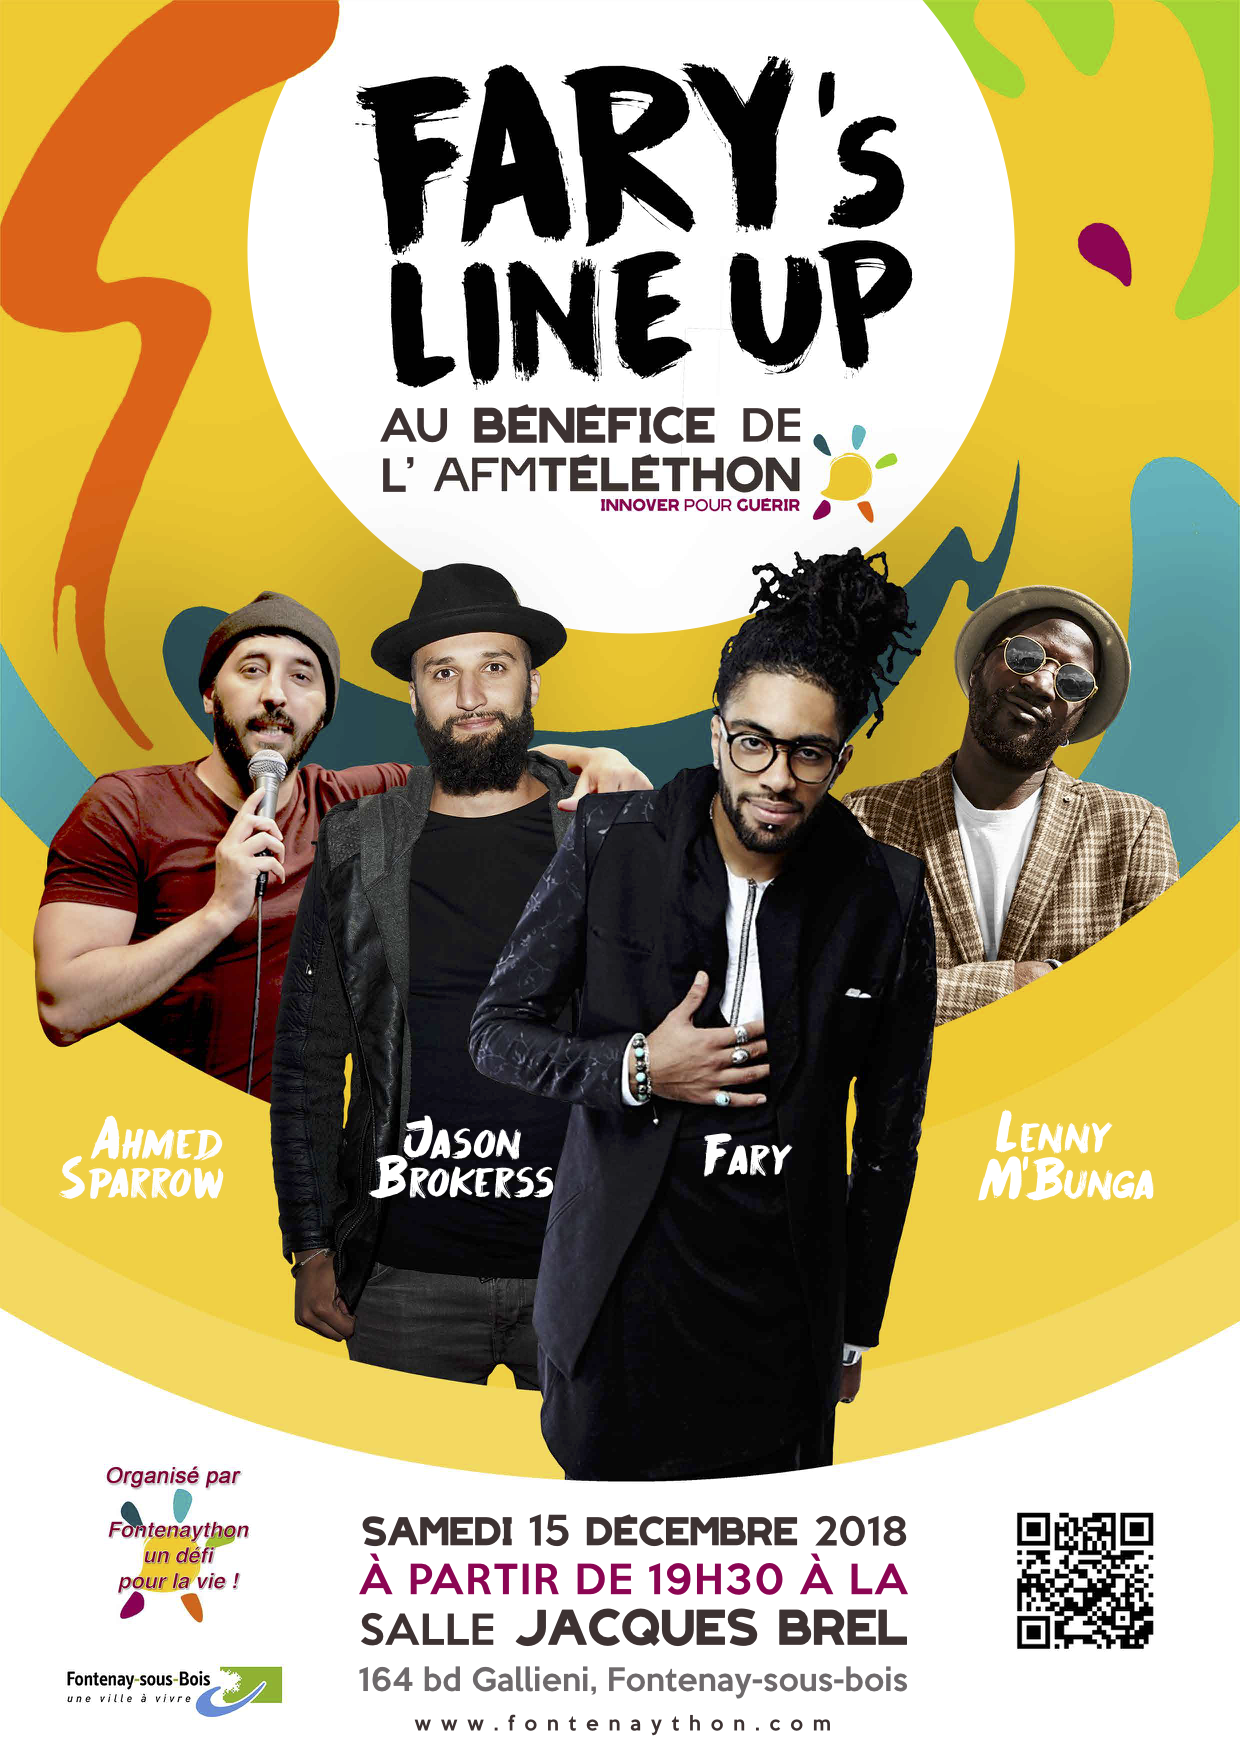 Grand spectacle 2018 du Fontenaython - Fary's line up